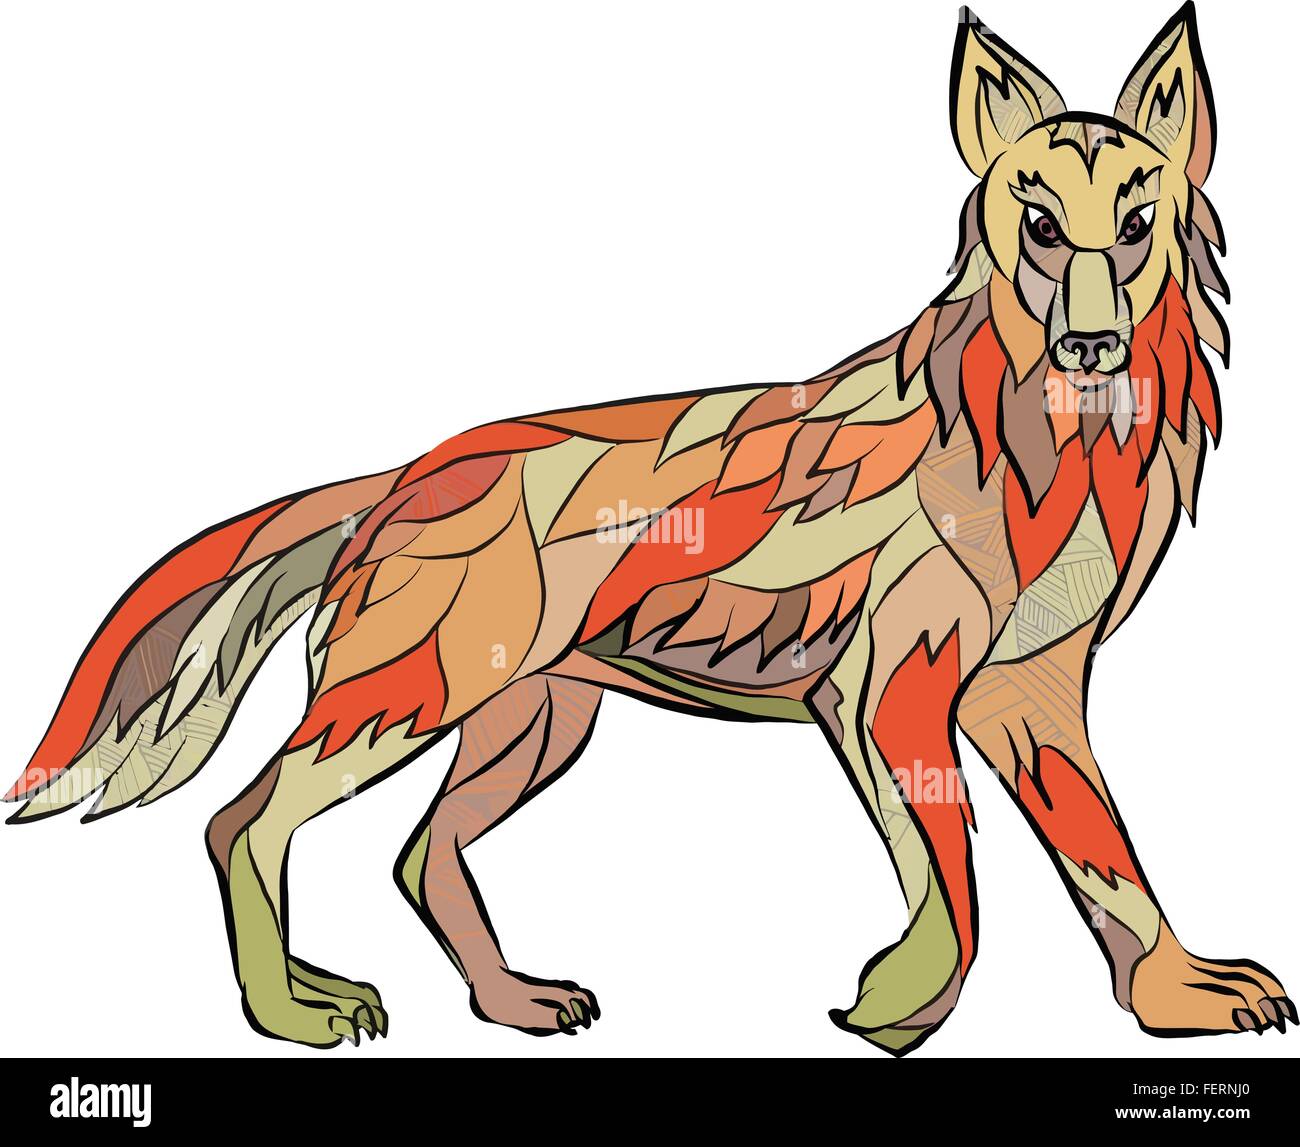 Drawing sketch style illustration of a coyote wild dog viewed from the side facing front set on isolated white background. Stock Vector